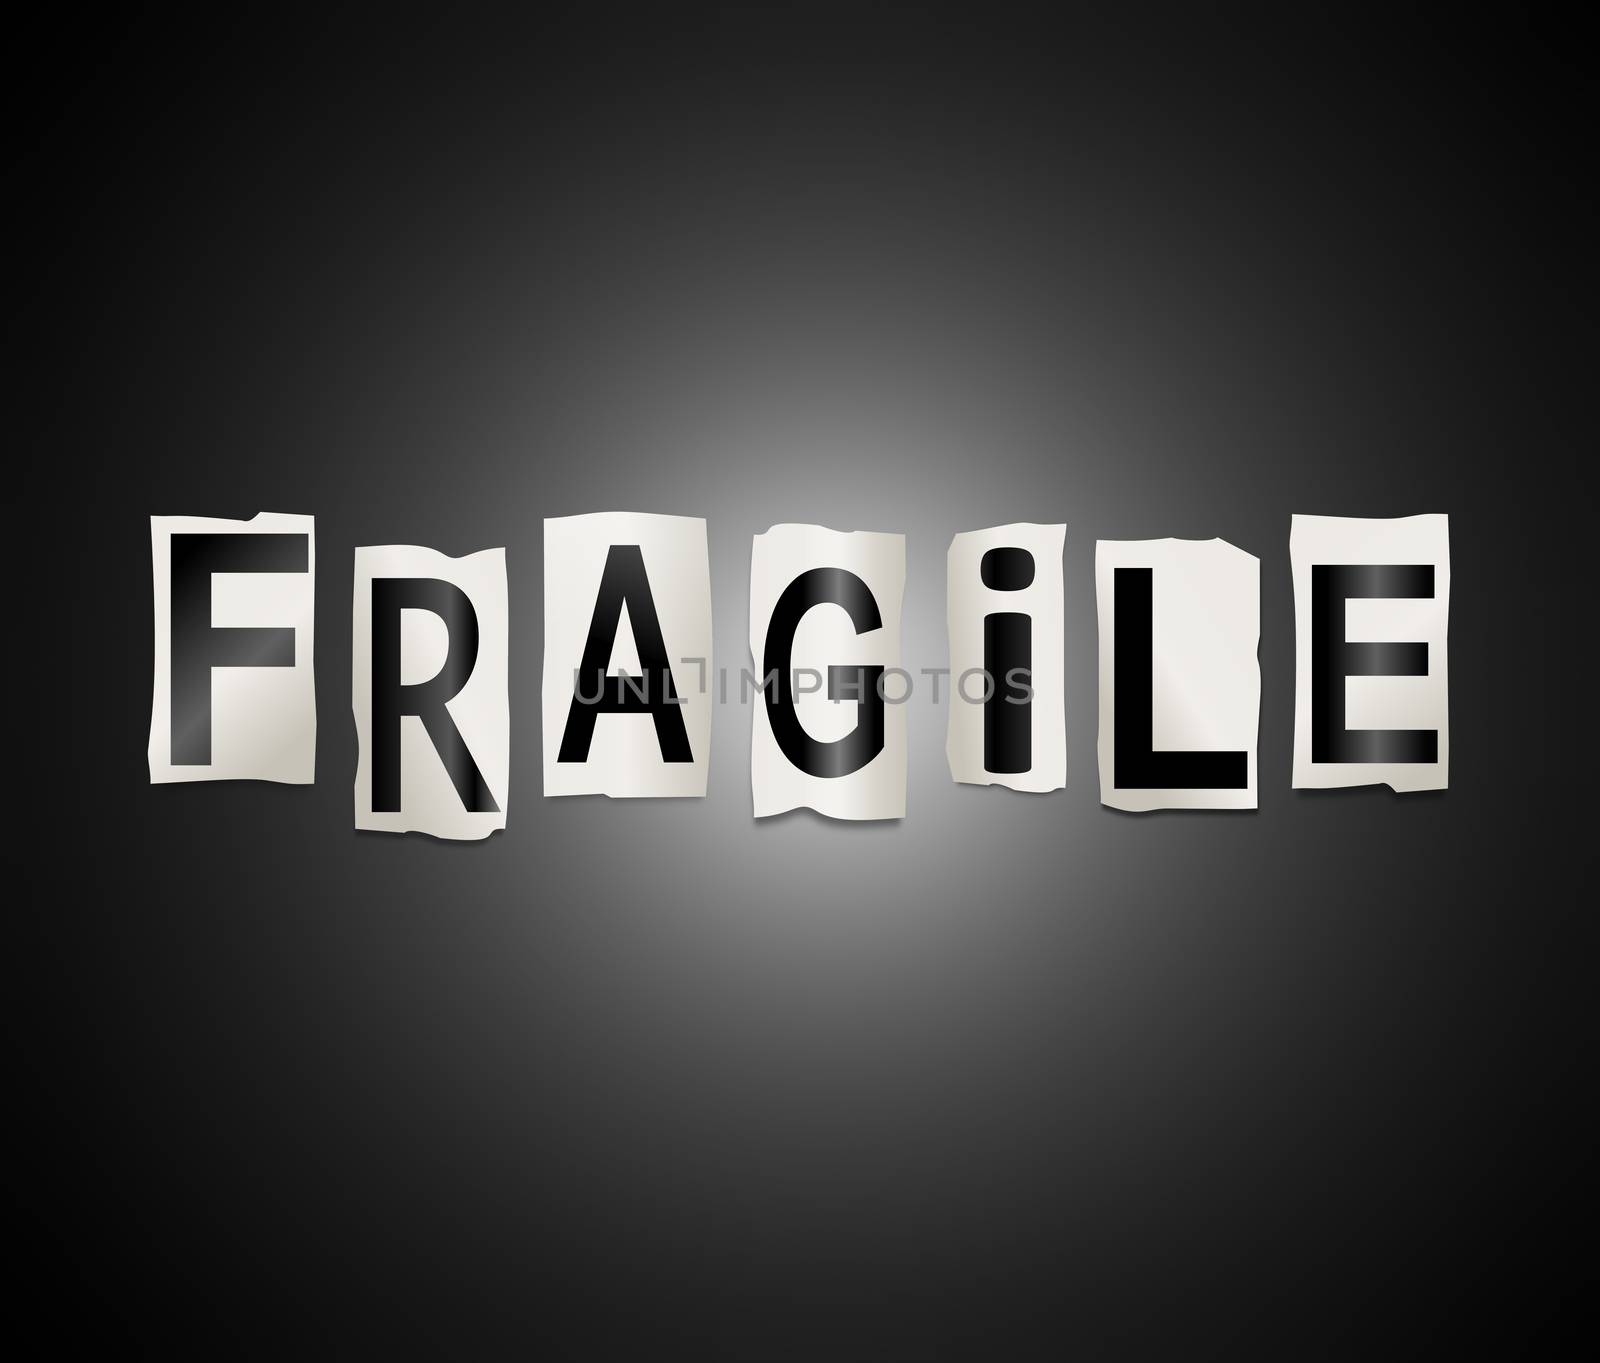 Illustration depicting a set of cut out printed letters arranged to form the word fragile.